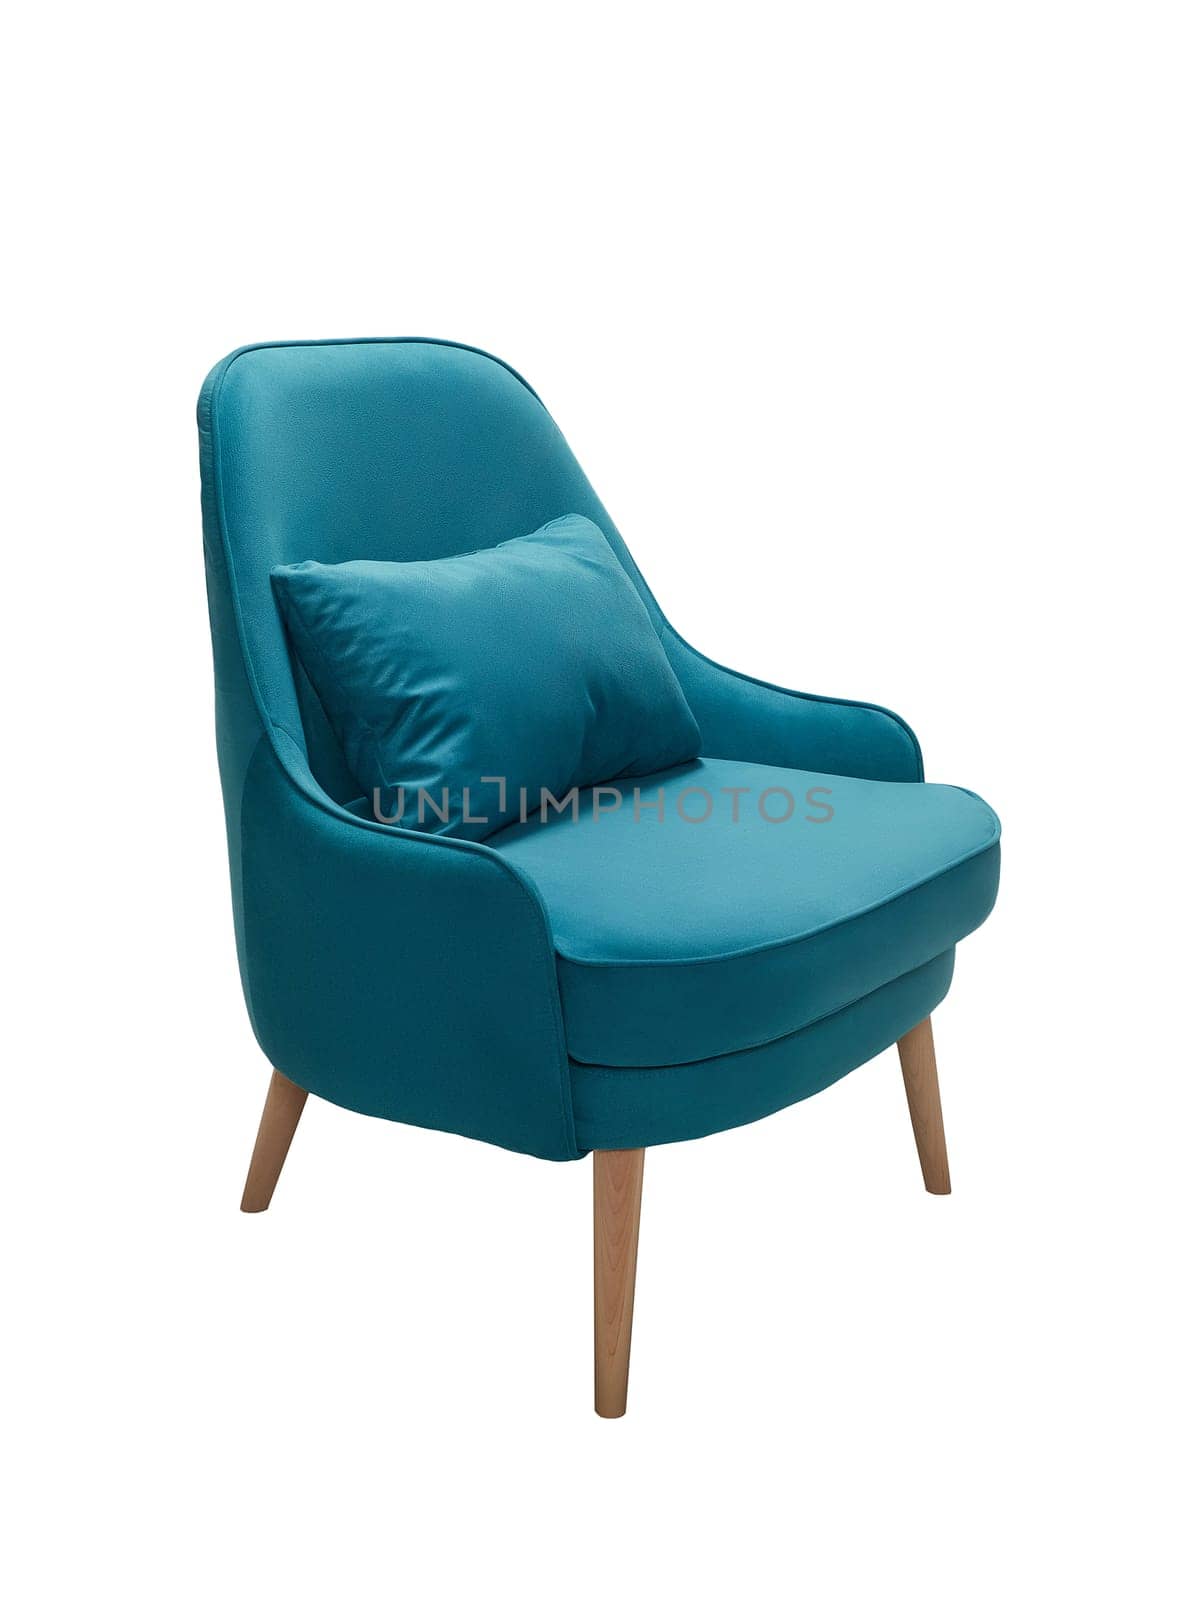 modern blue fabric armchair with wooden legs isolated on white background, side view.